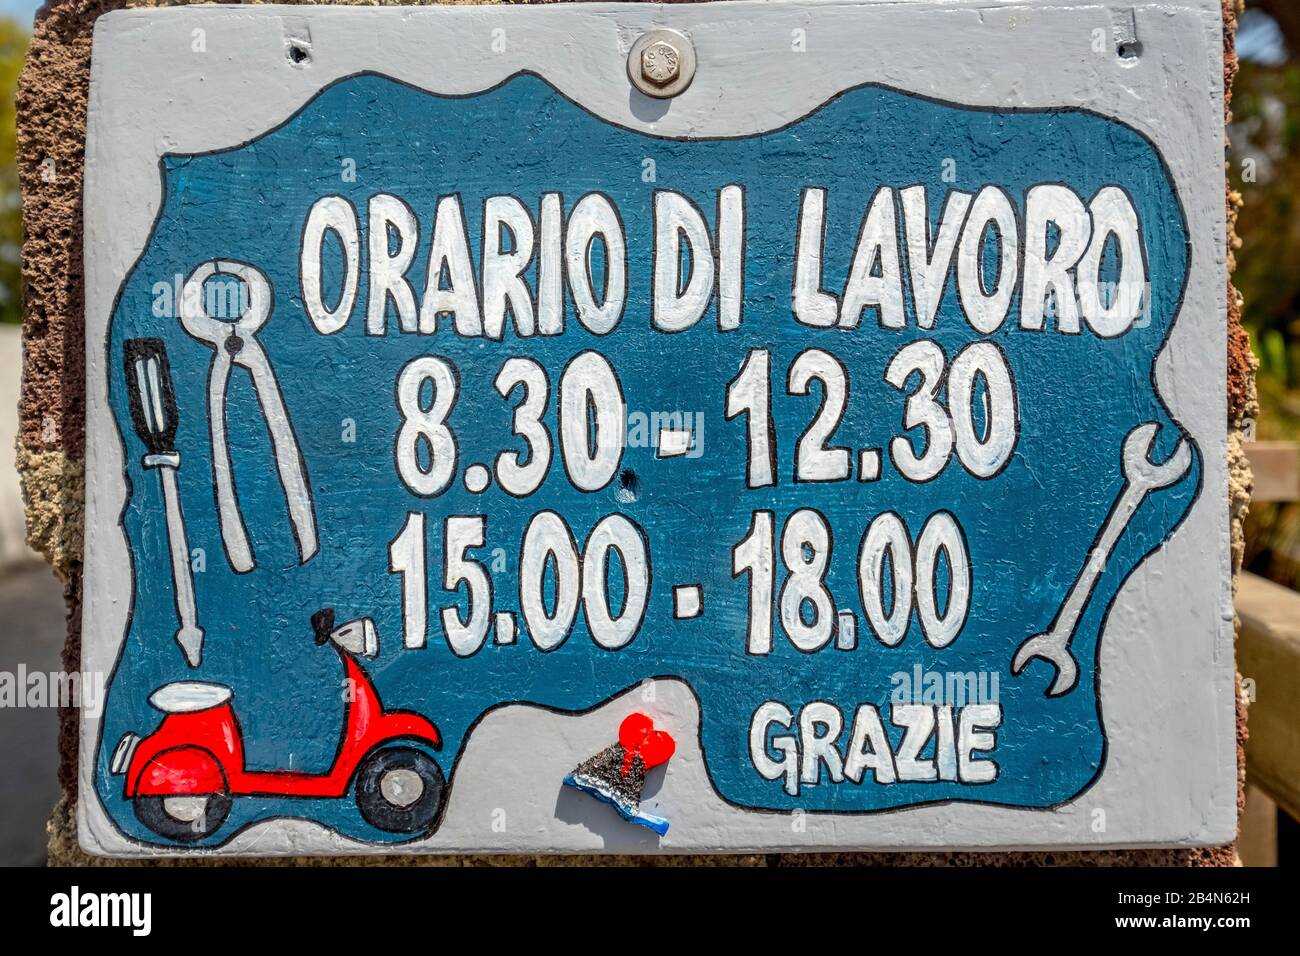 Orario Di Lavoro, working time sign of a scooter workshop, opening times, Stromboli, Aeolian Islands, Aeolian Islands, Tyrrhenian Sea, Southern Italy, Europe, Sicily, Italy Stock Photo